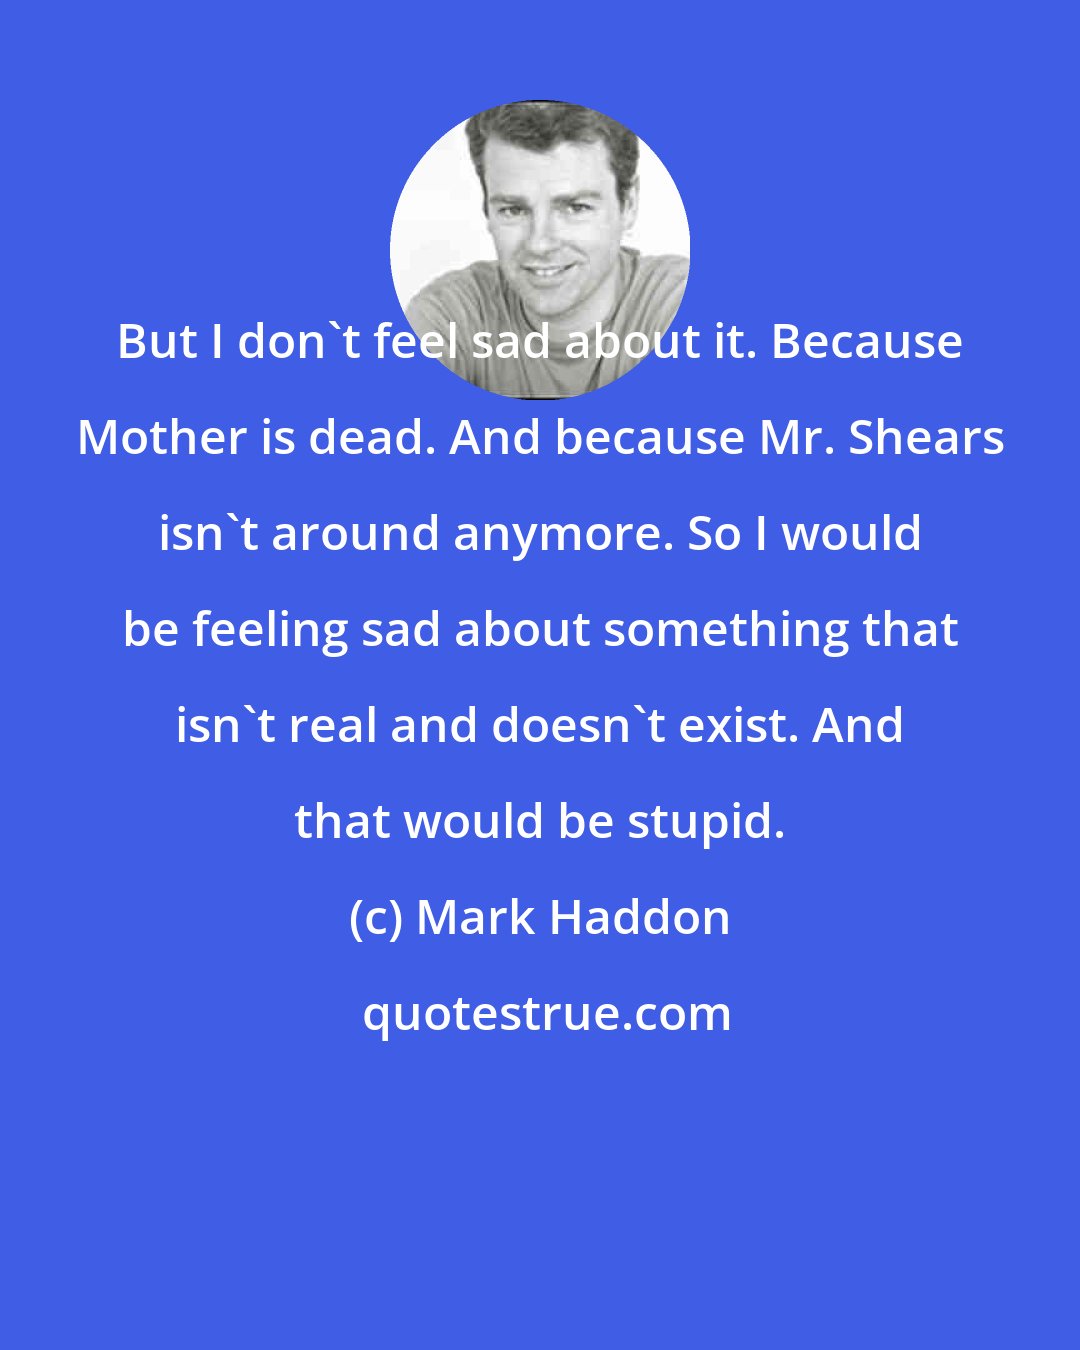 Mark Haddon: But I don't feel sad about it. Because Mother is dead. And because Mr. Shears isn't around anymore. So I would be feeling sad about something that isn't real and doesn't exist. And that would be stupid.